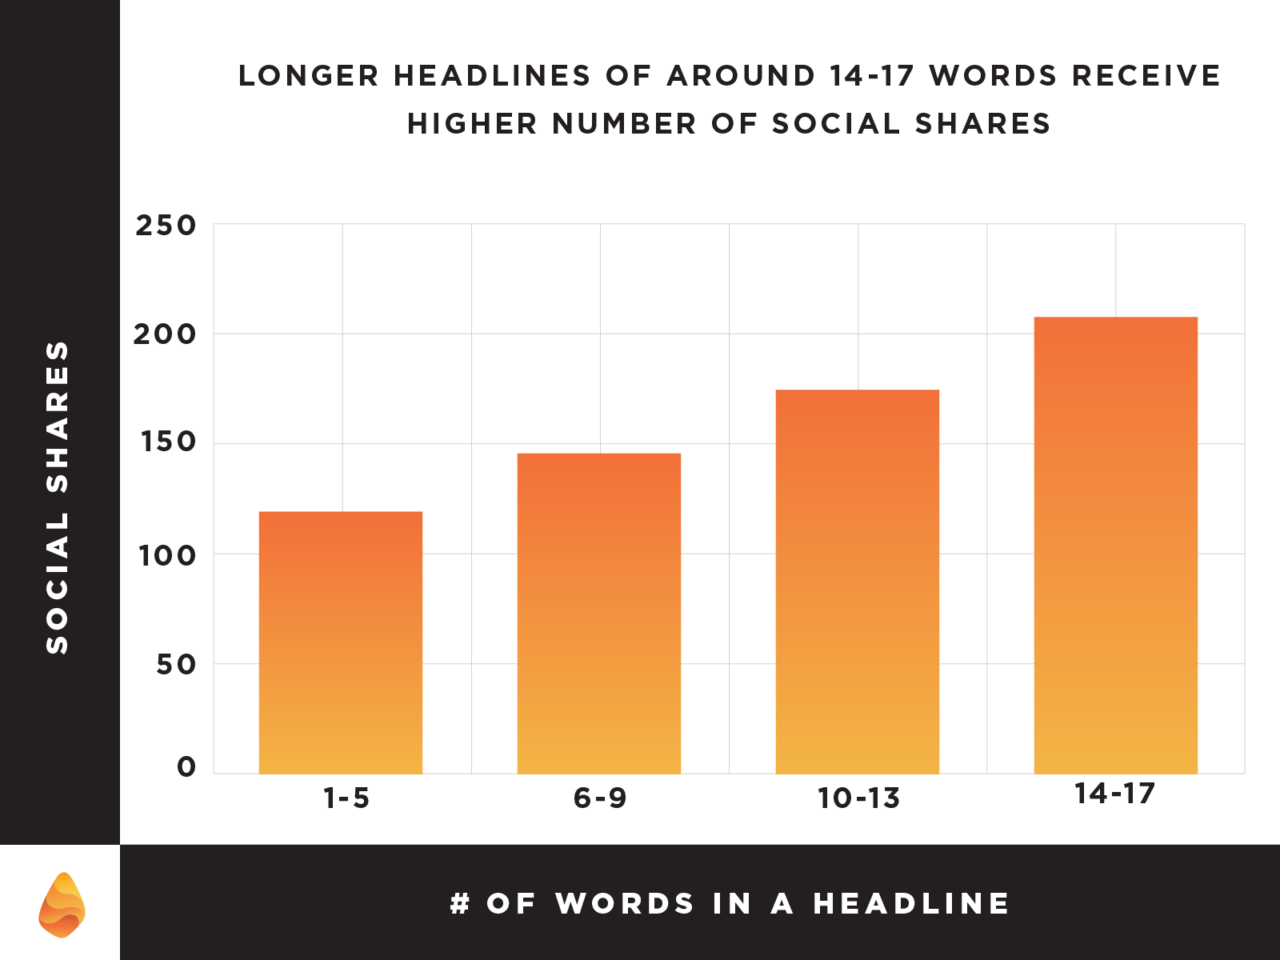 Graph showing that longer headlines (14-17 words) receive a higher number of social shares compared to shorter headlines